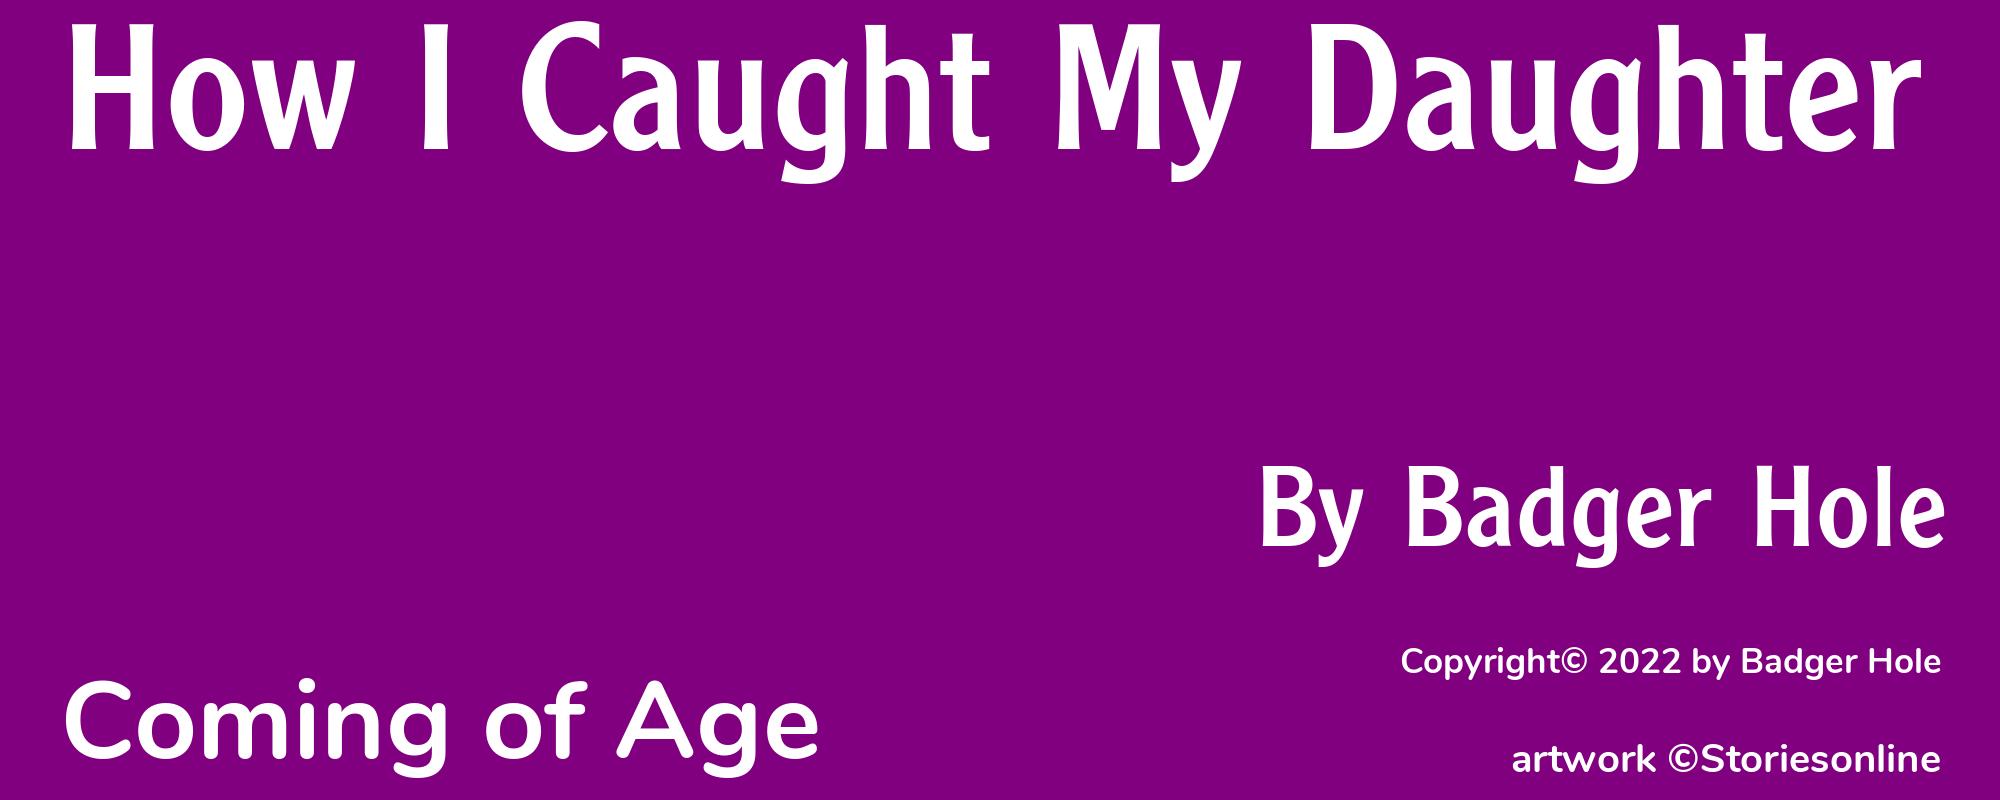 How I Caught My Daughter - Cover